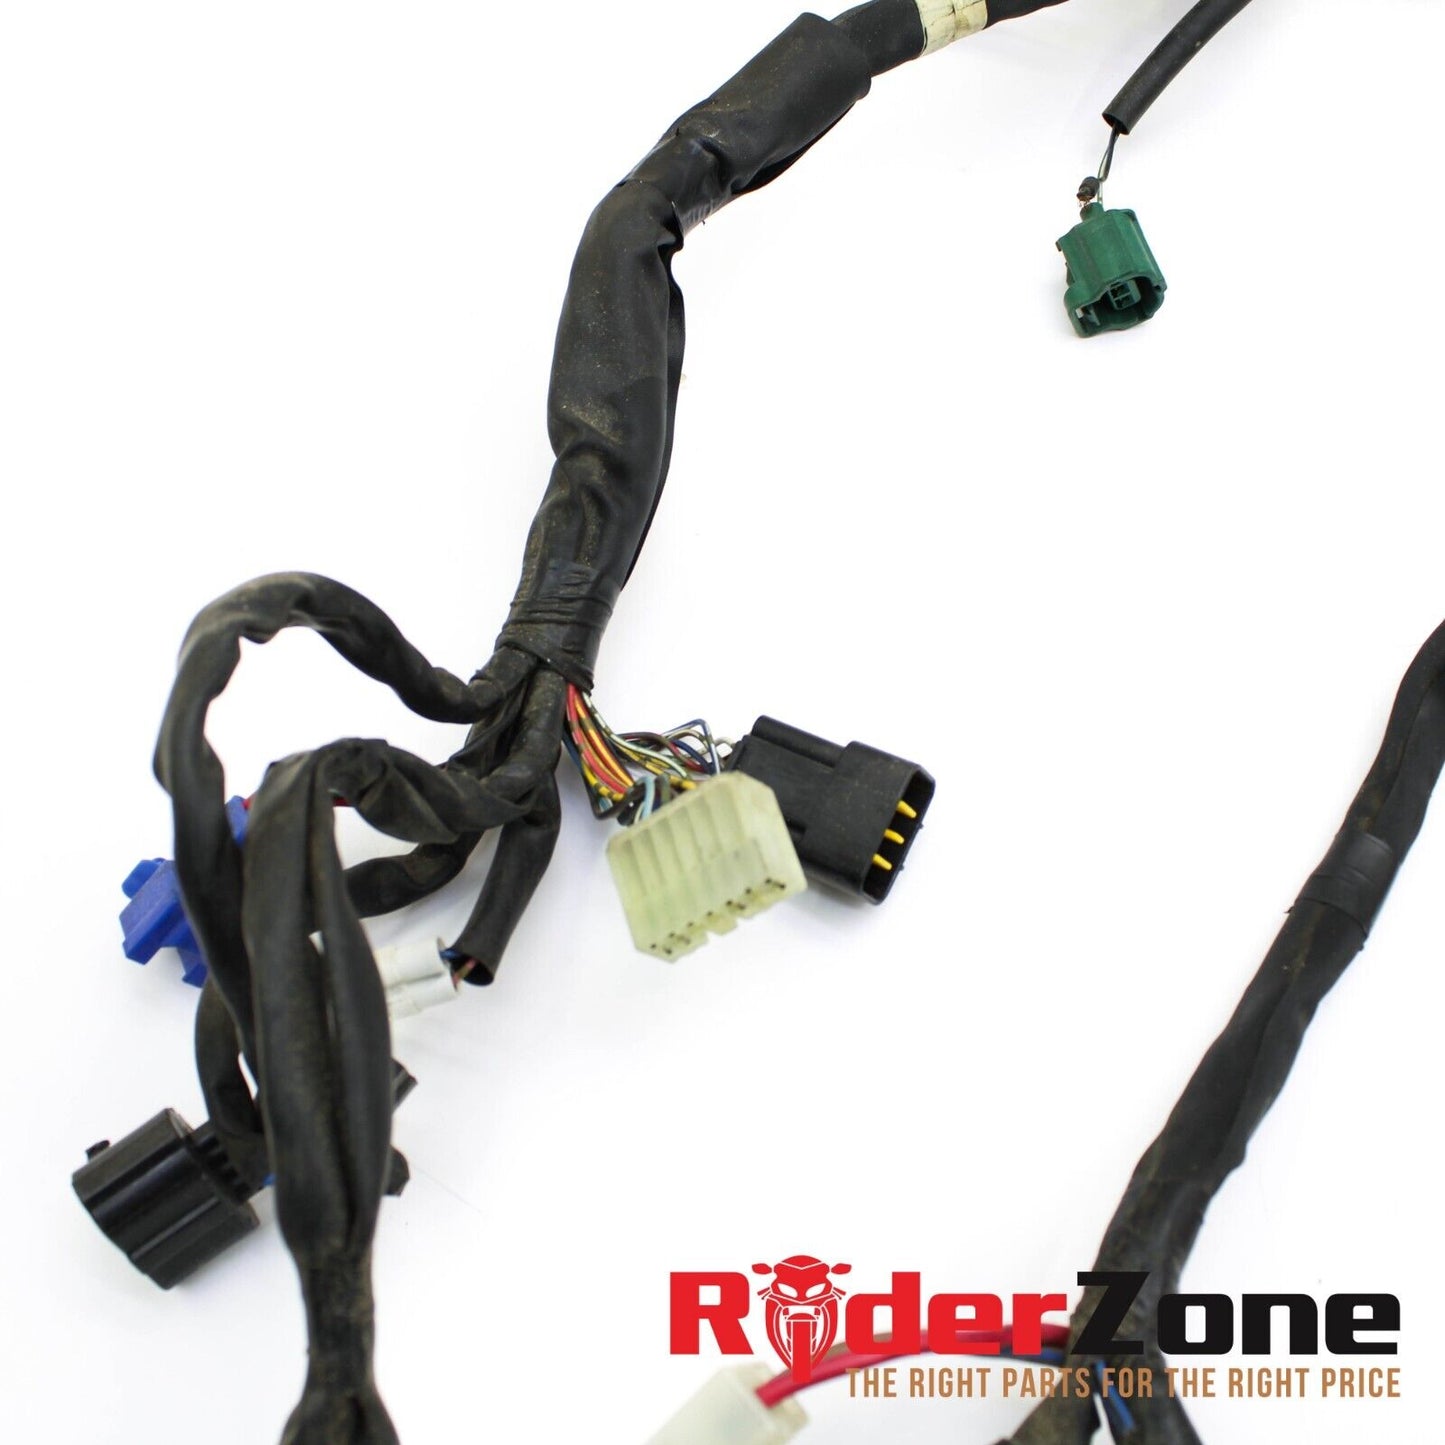 2008 - 2016 YAMAHA YZF R6 MAIN HARNESS WIRING LOOM CABLES ELECTRICAL SYSTEM